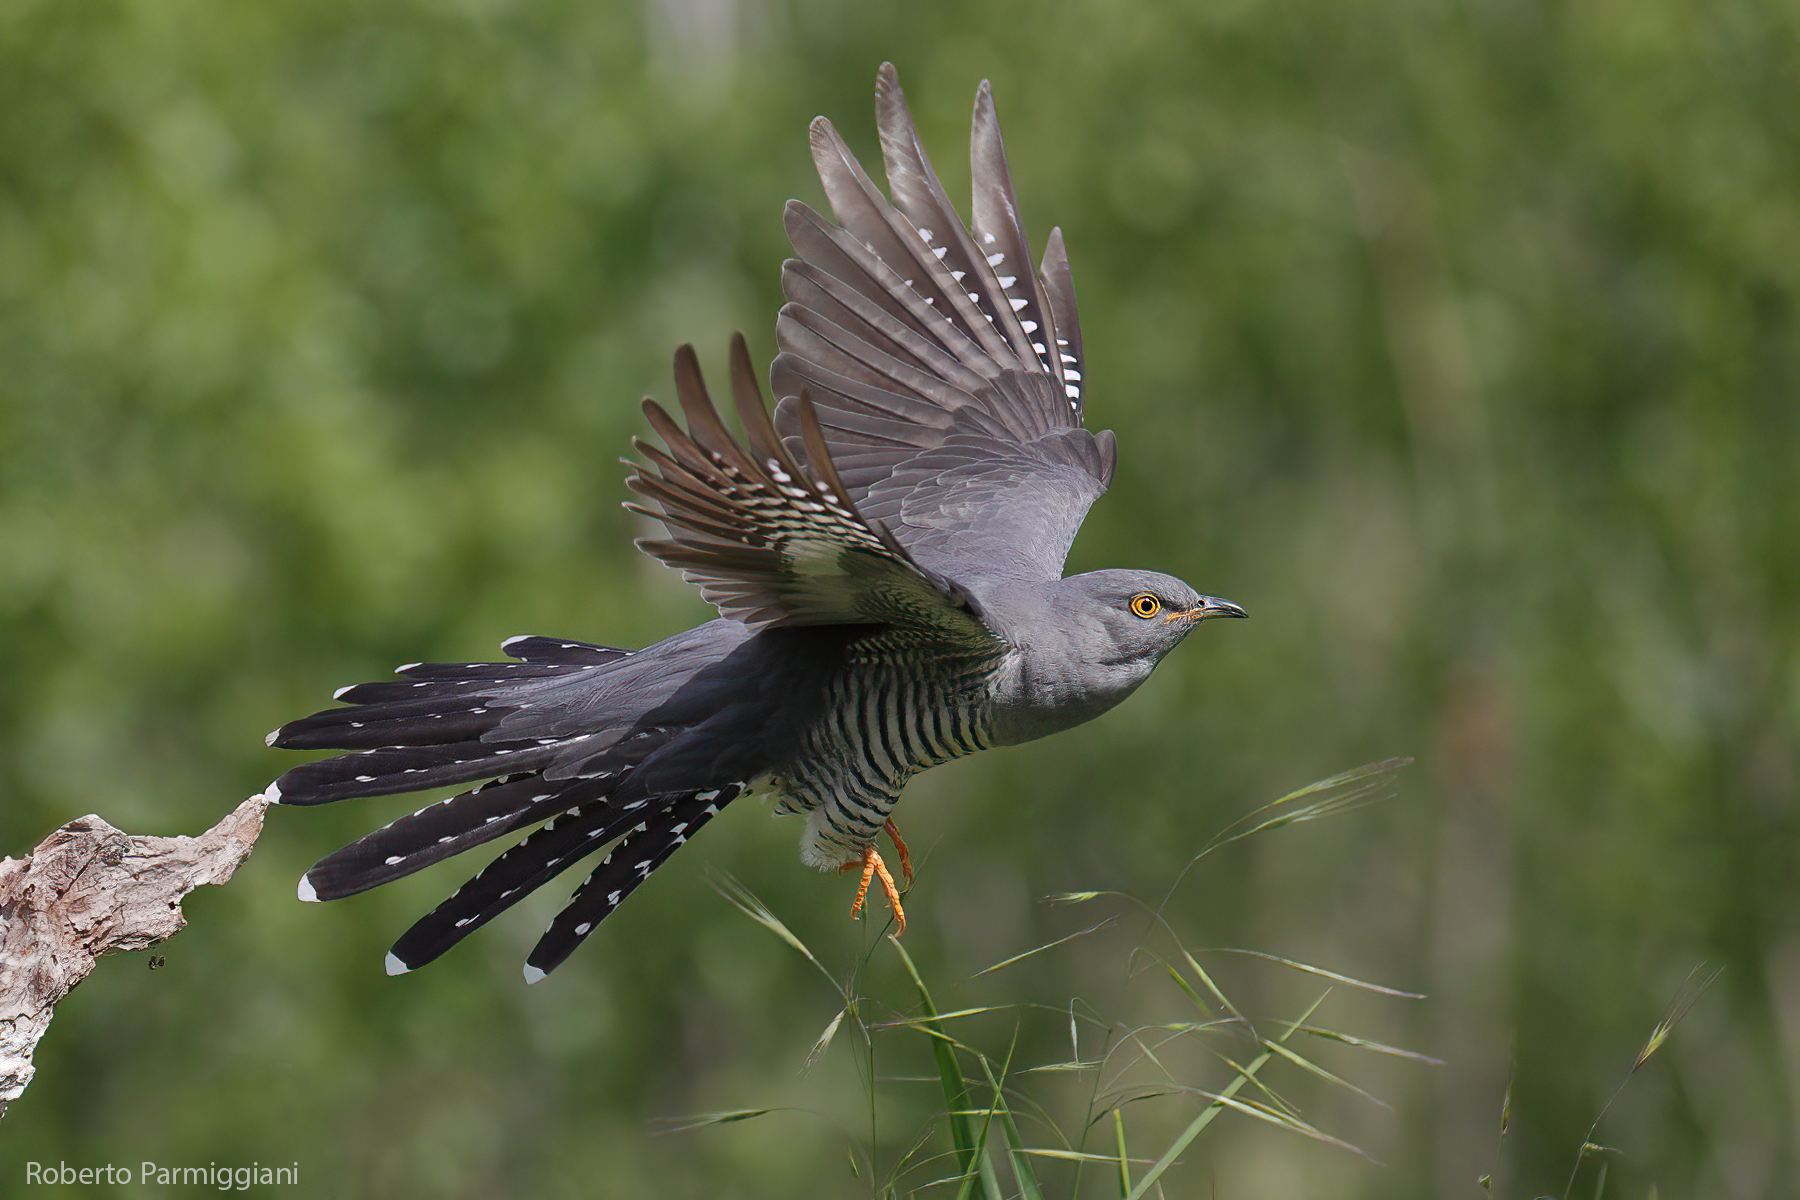 Cuckoo on the fly...